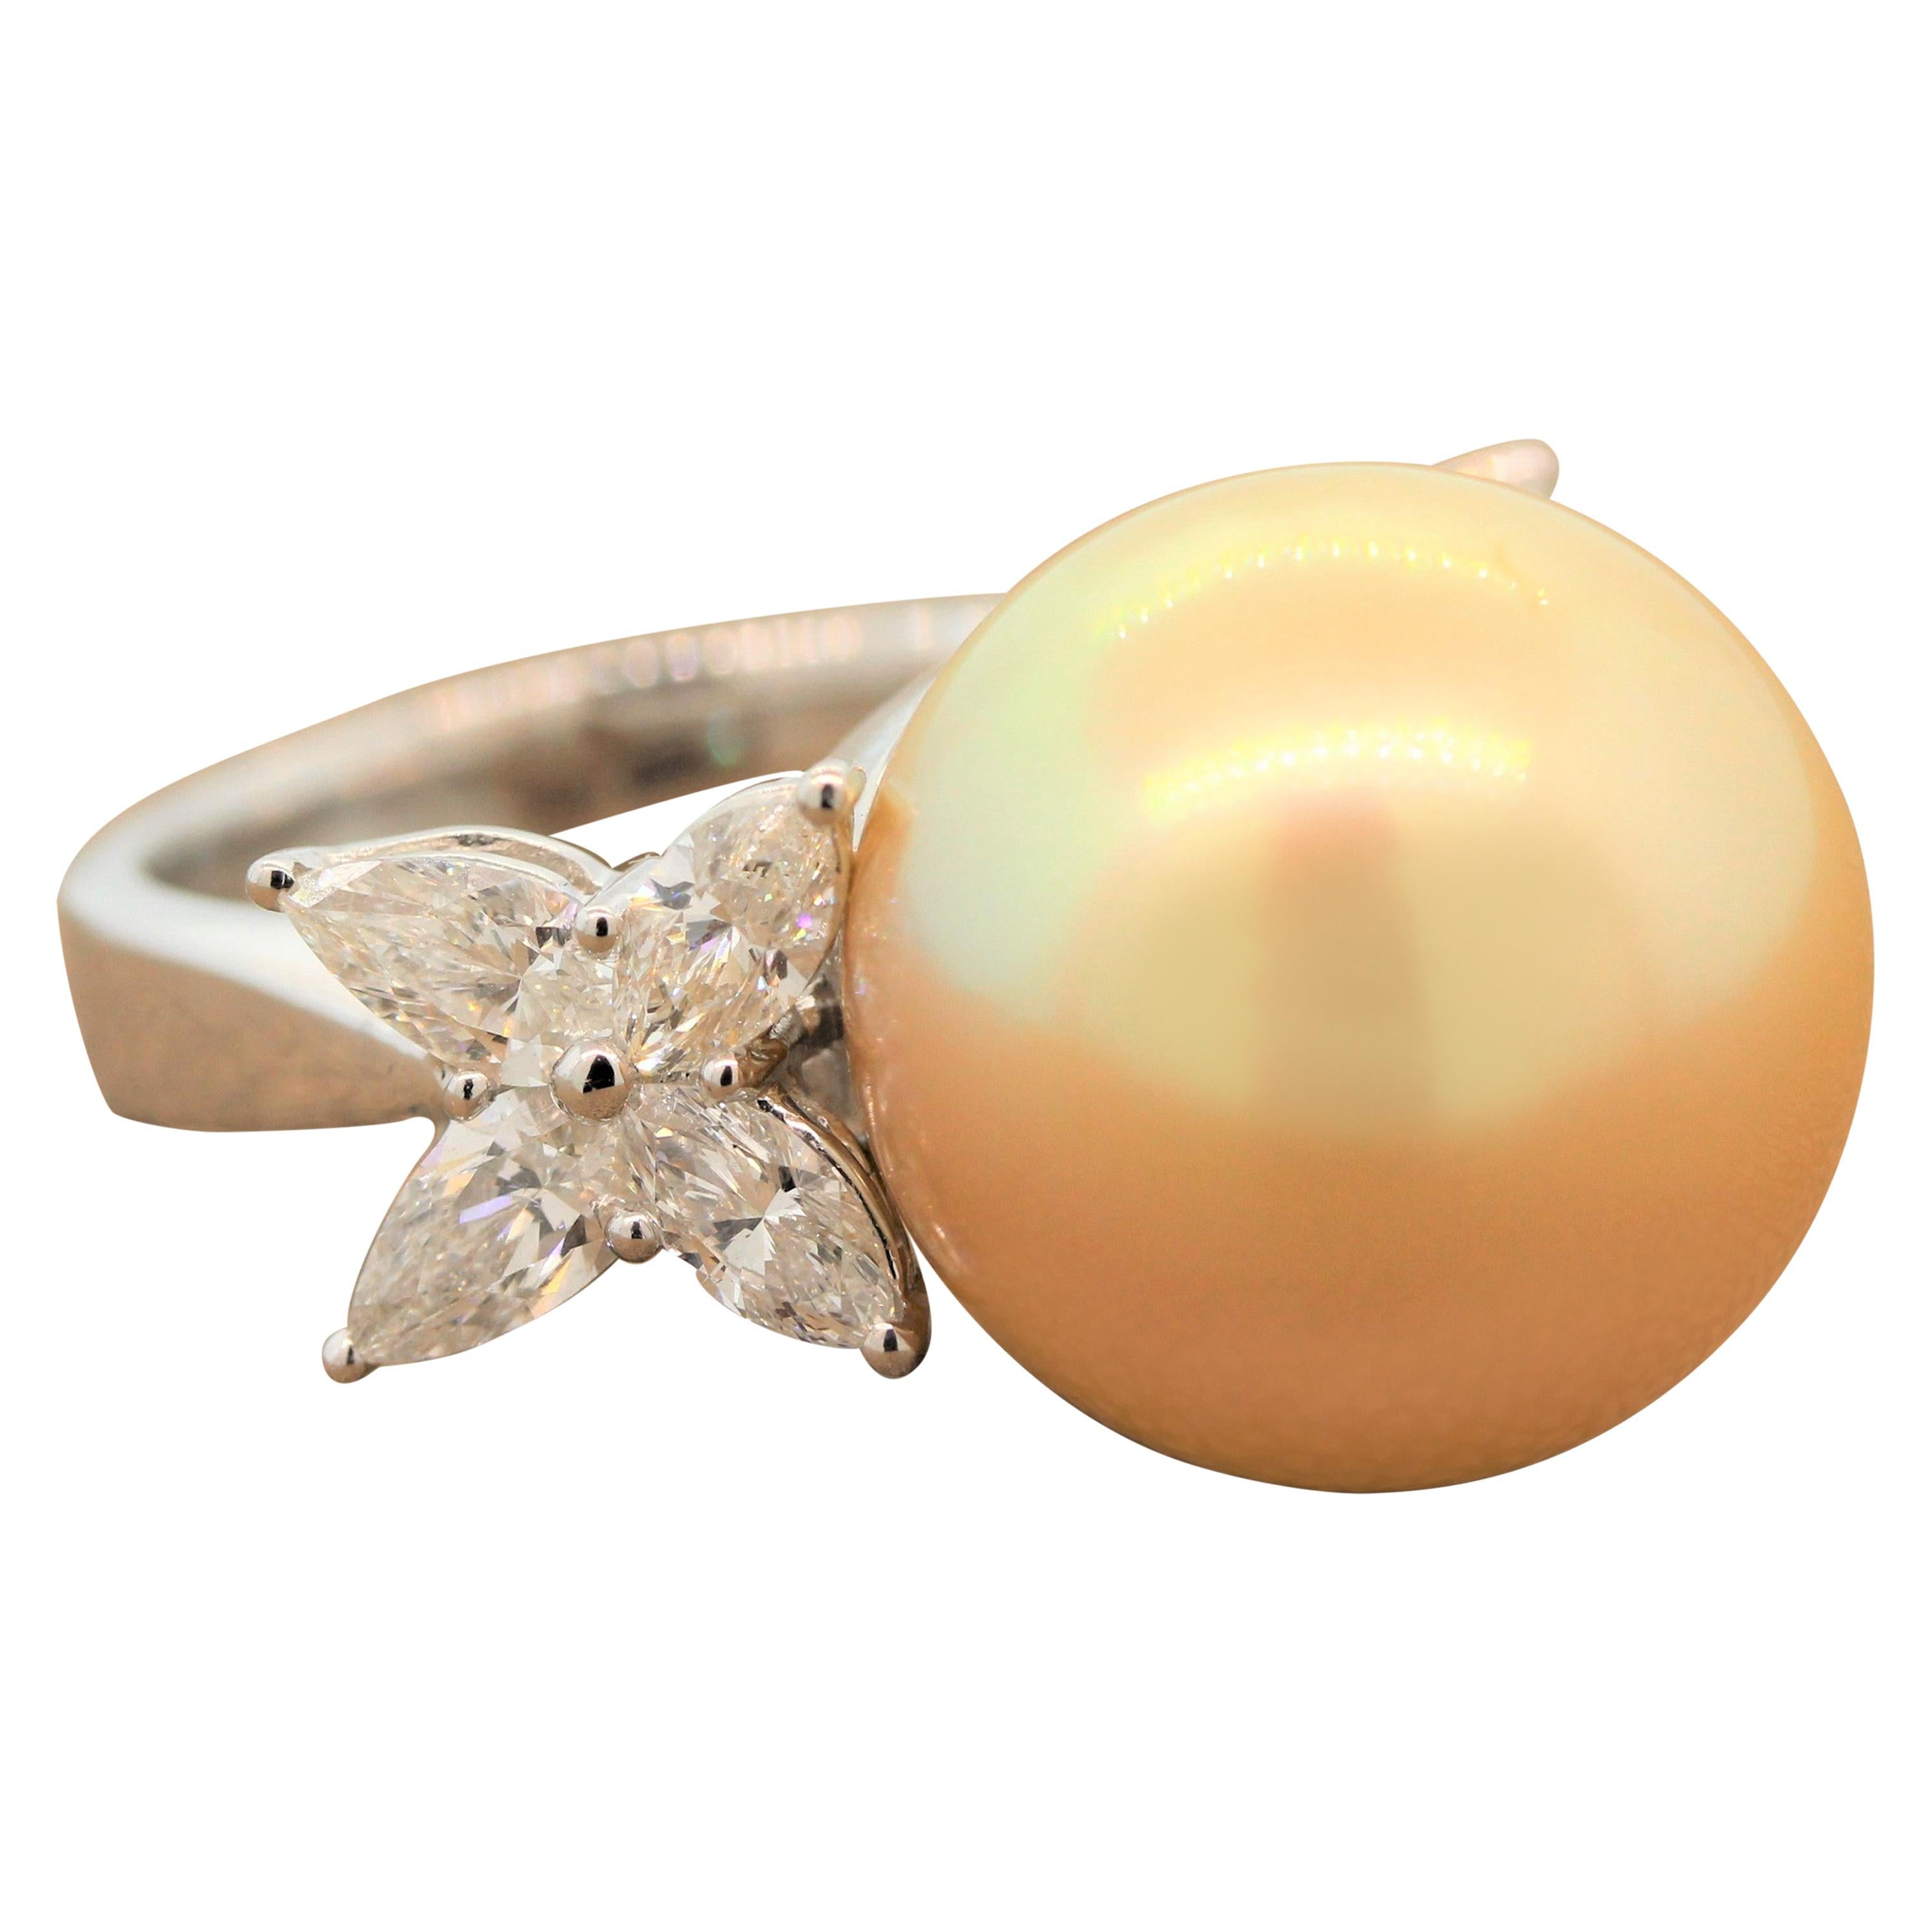 Golden South Sea Pearl Diamond Gold Ring